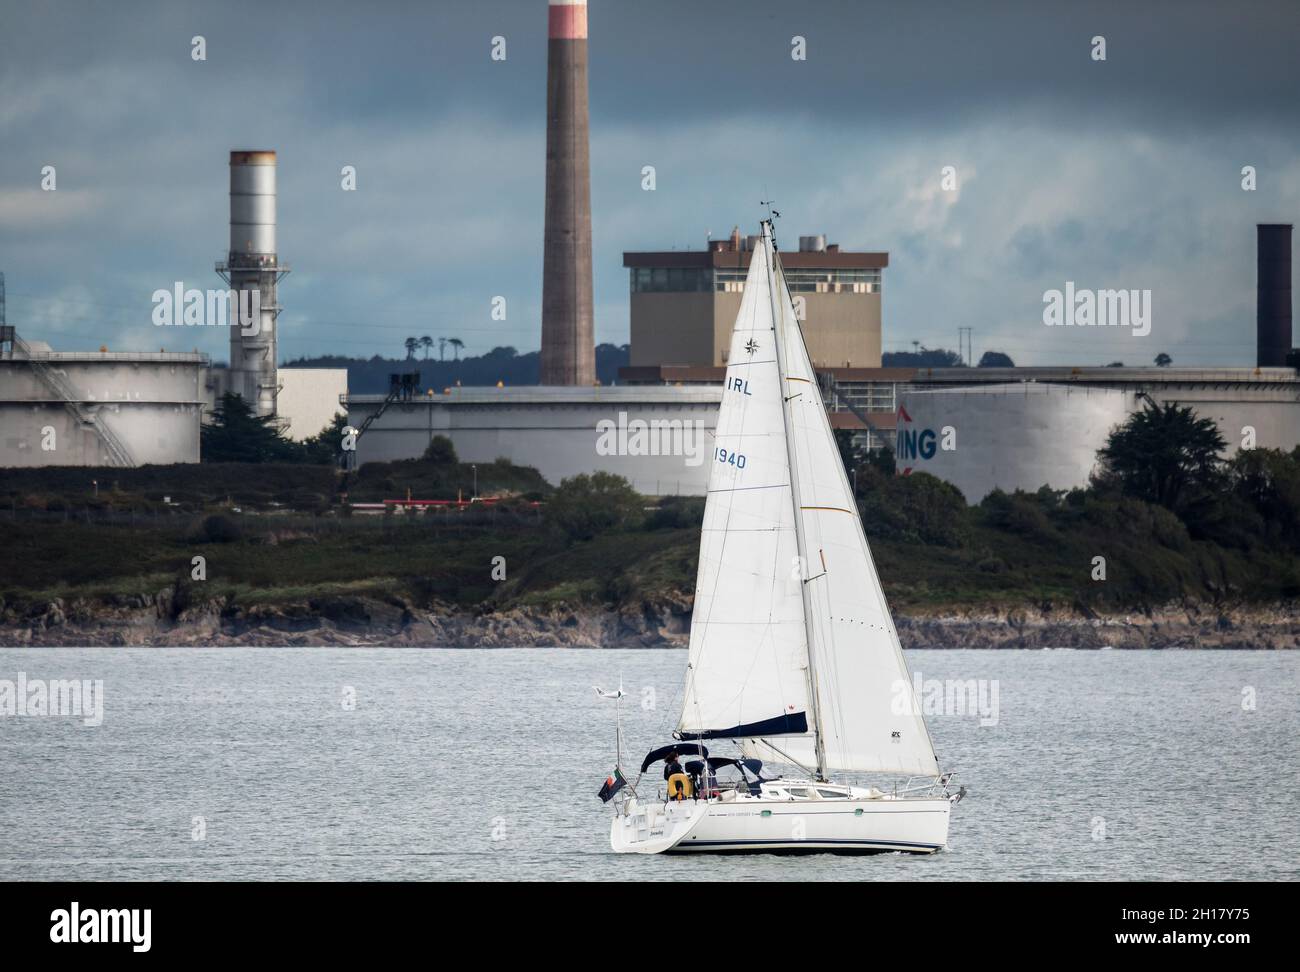 Cork Harbour, Cork, Ireland. 17th October, 2021. Yacht Snowdog passing the storage tanks at the oil refinery and generating station in Whitegate as it heads out for a day's sailing in Cork Harbour, Cork, Ireland. - Picture; David Creedon / Alamy Live News Stock Photo